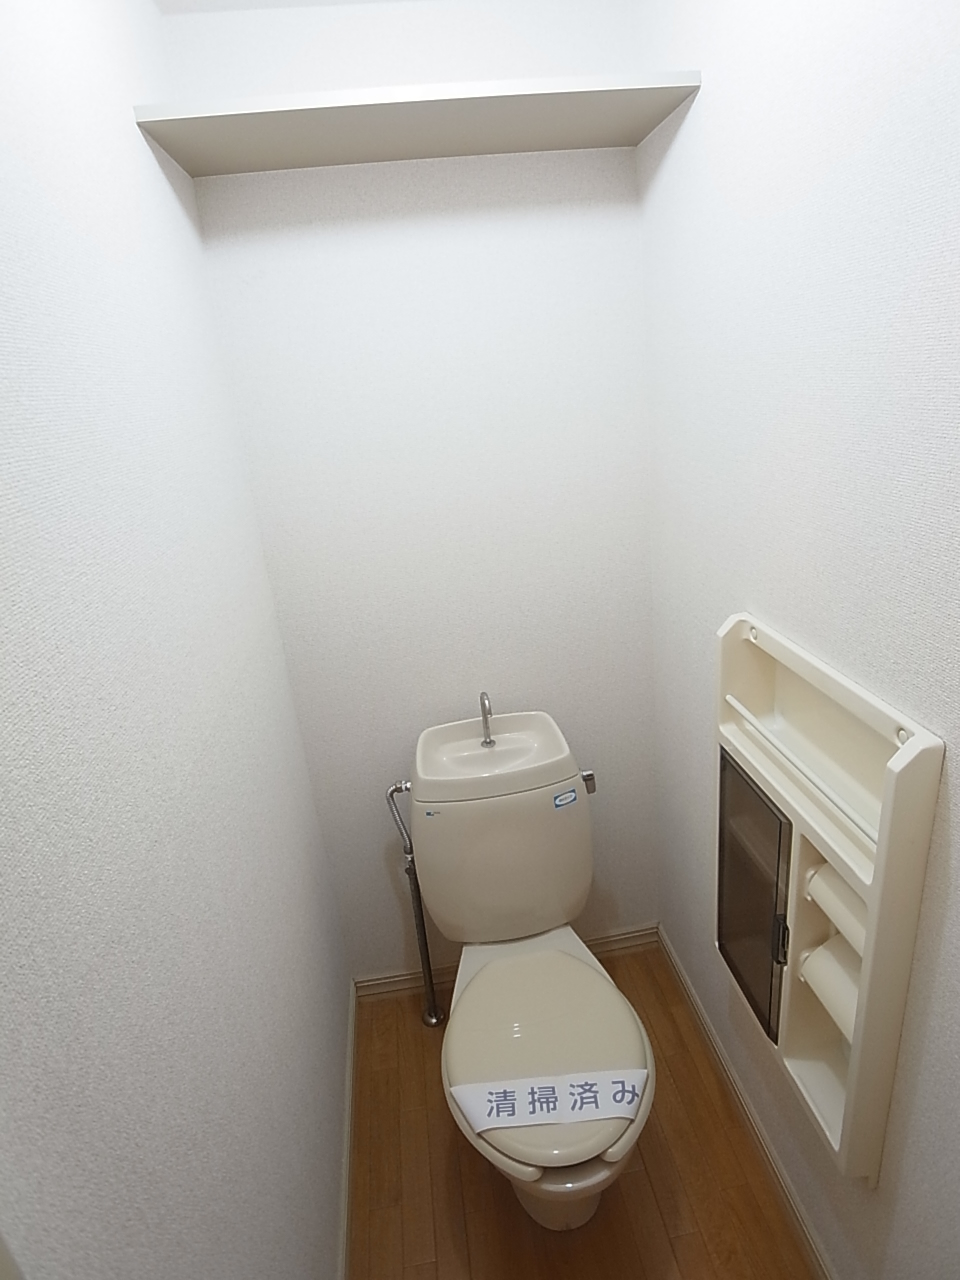 Toilet. It will be by bus toilet